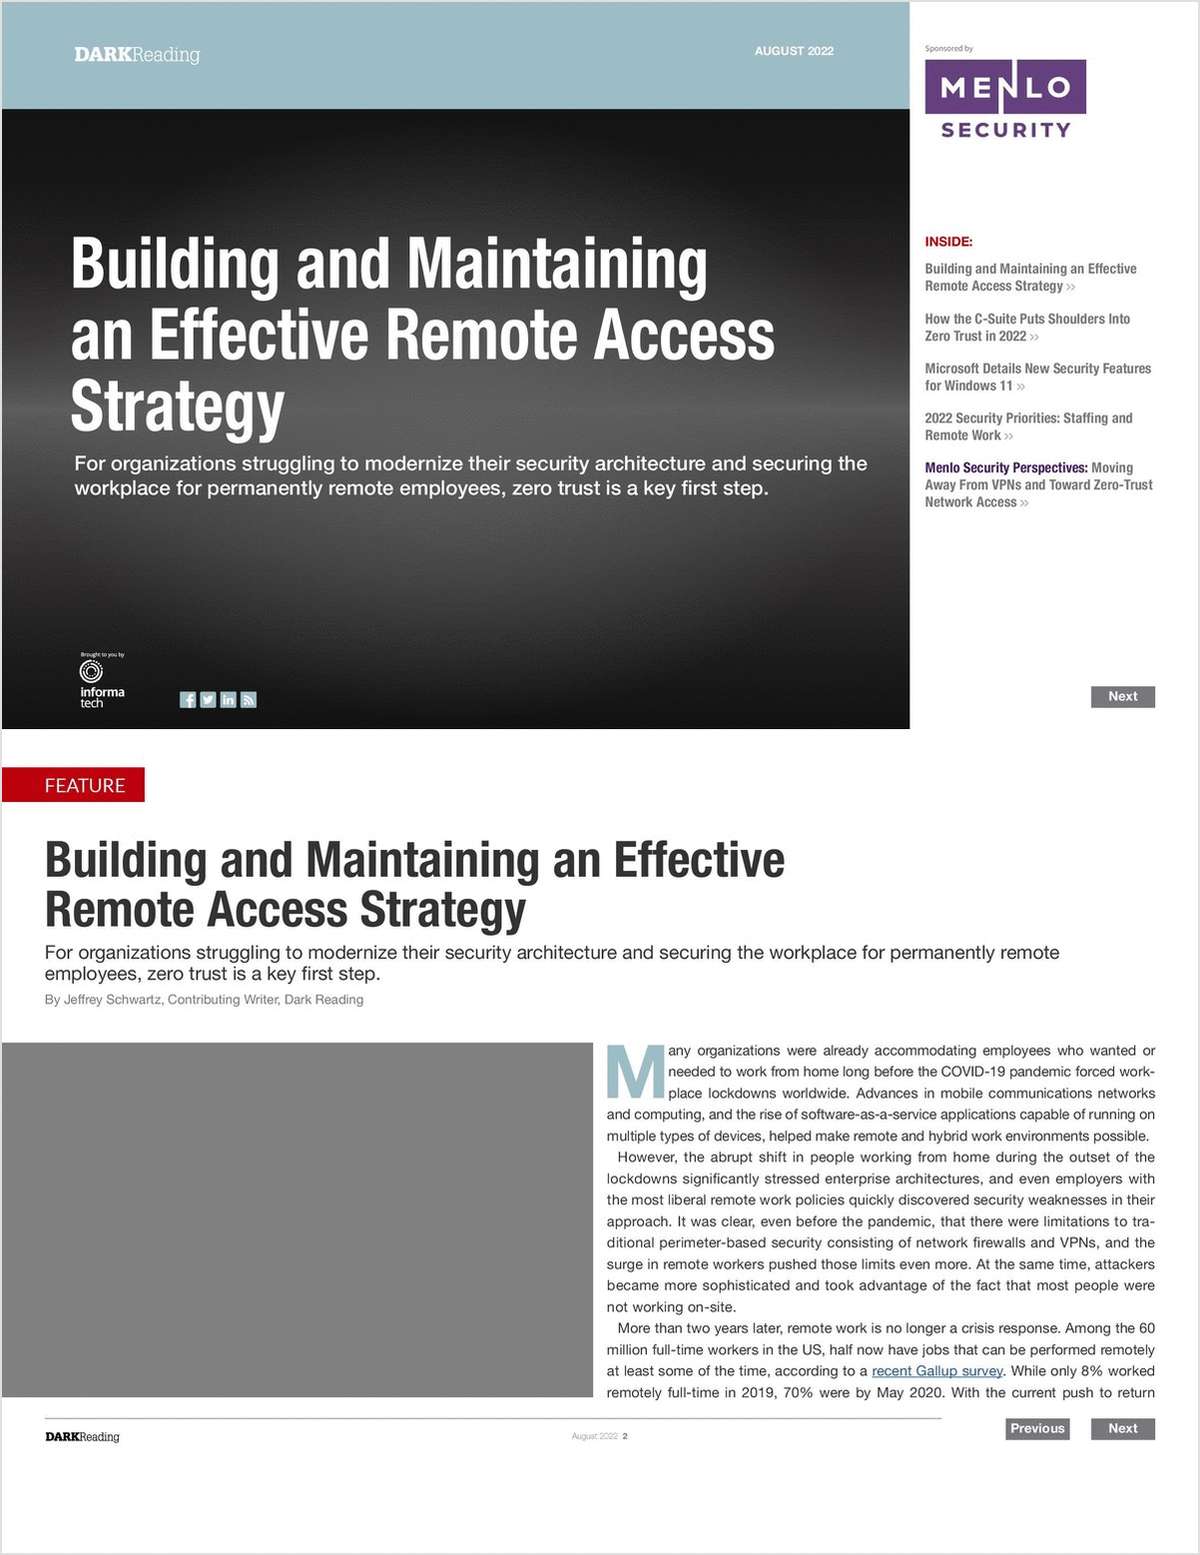 Report: Building and Maintaining an Effective Remote Access Strategy